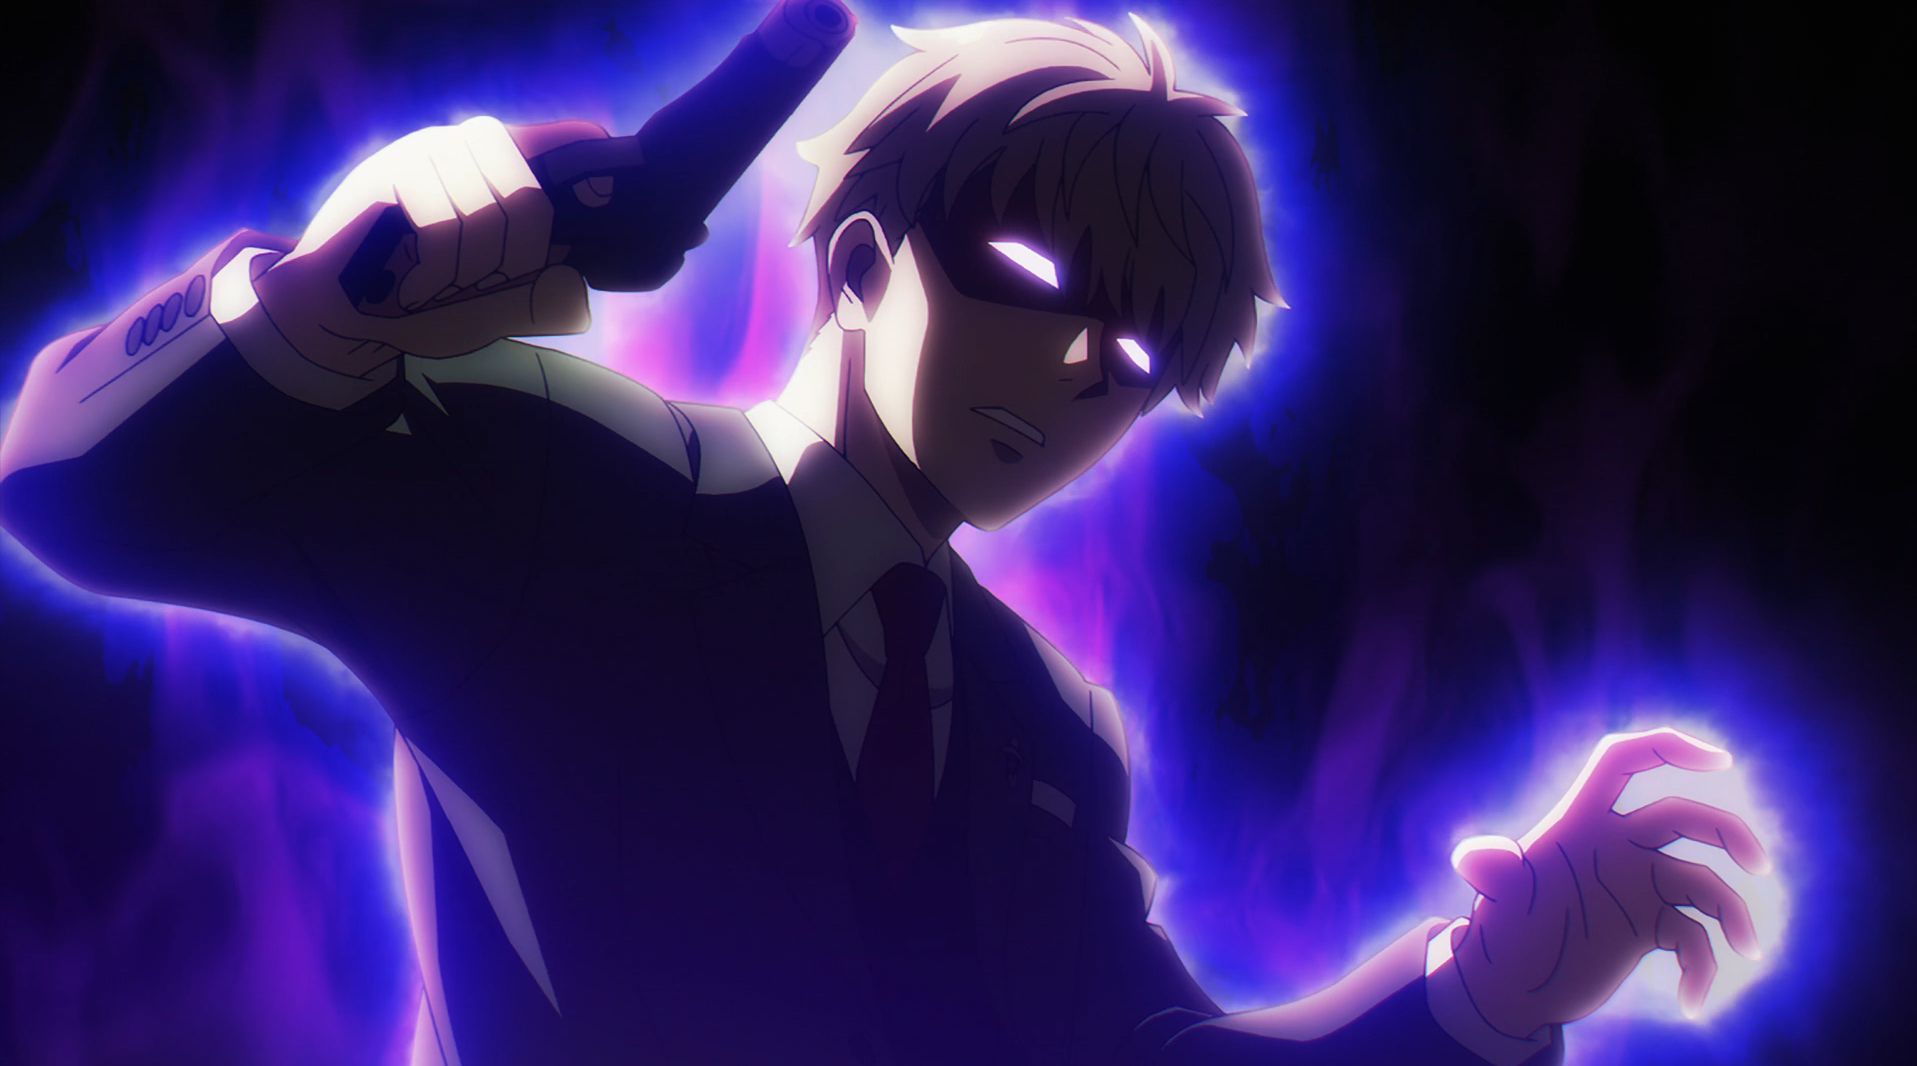 Anime 1917x1066 Spy x Family Loid Forger glowing eyes blonde gun purple background anime Anime screenshot anime boys boys with guns hands angry tie suit and tie